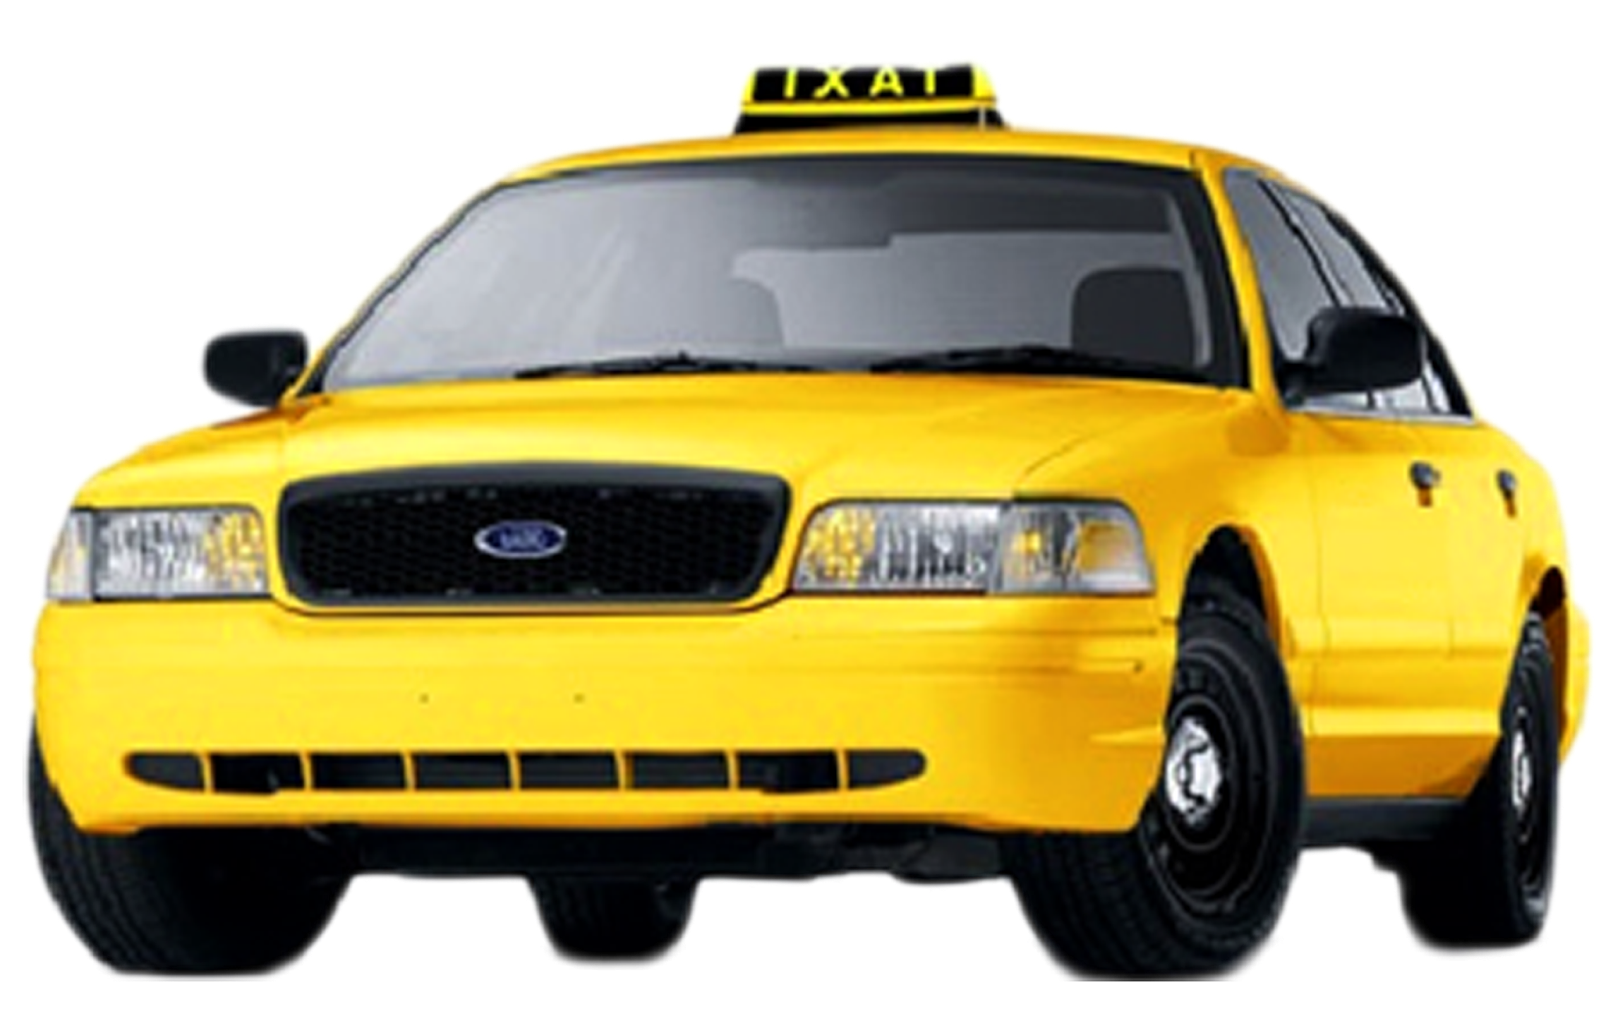 Image result for Taxi Service